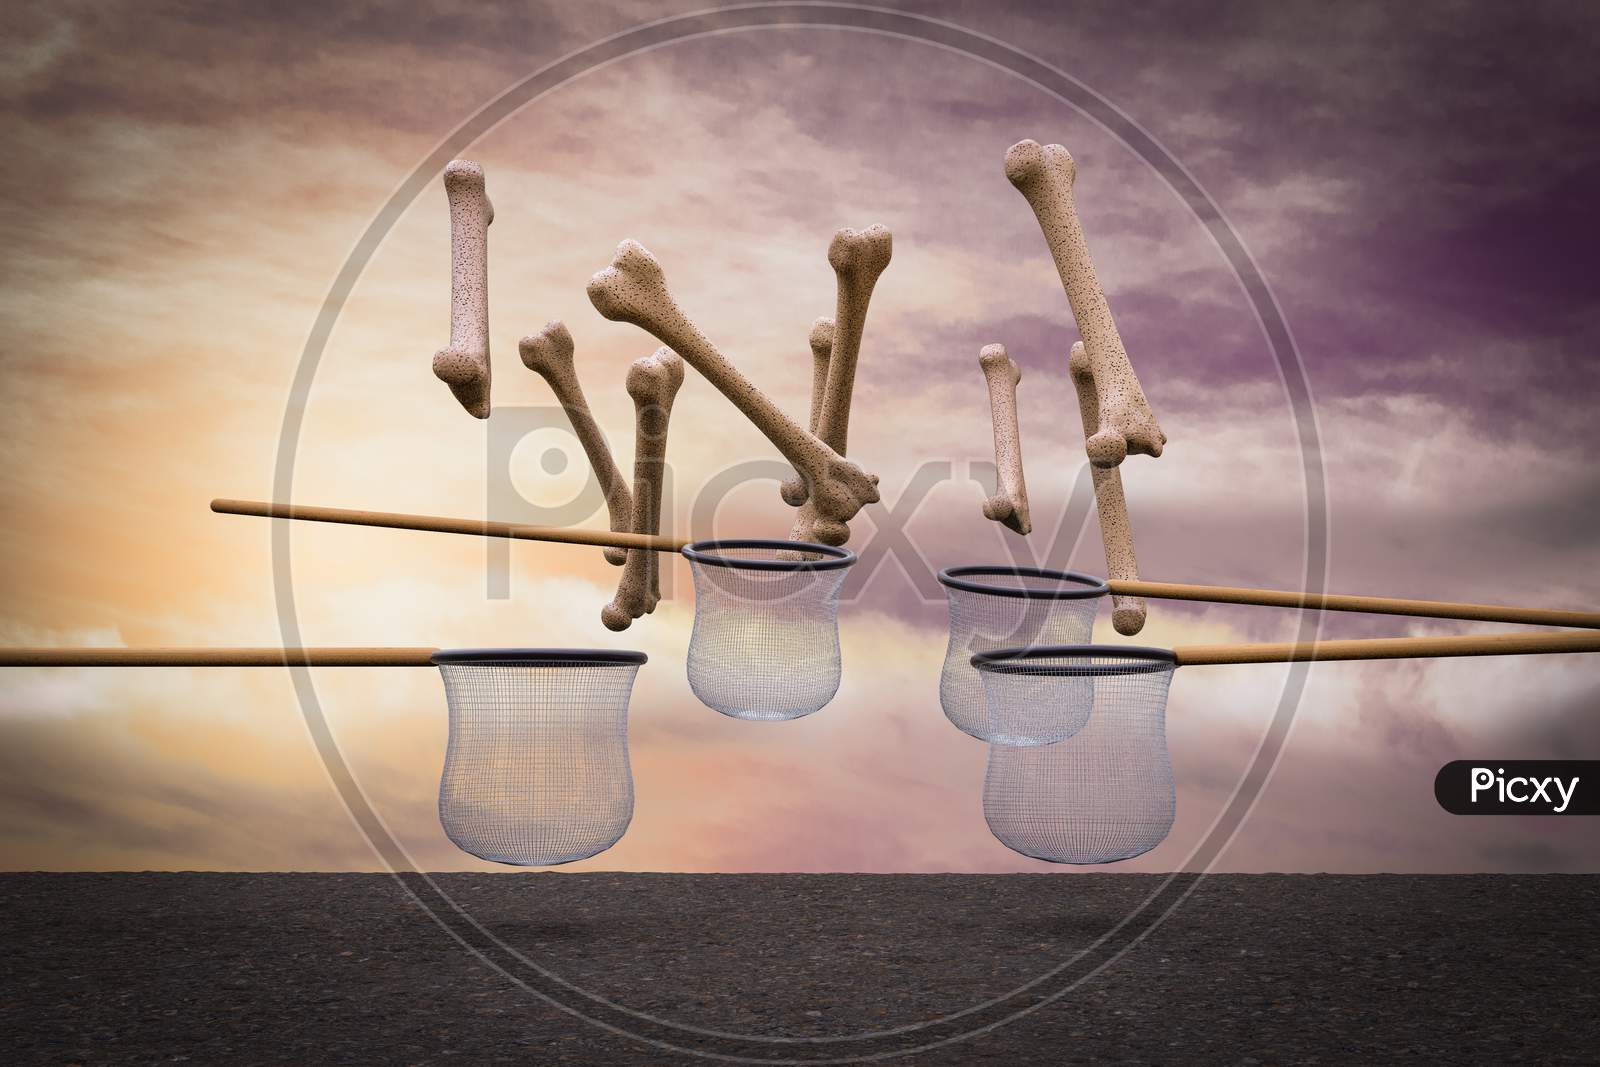 Human Thigh Bones Falling From Sky And The Nets Try To Catch Them At Sunset Magenta Day Demonstrating Osteoporosis Help Concept. 3D Illustration